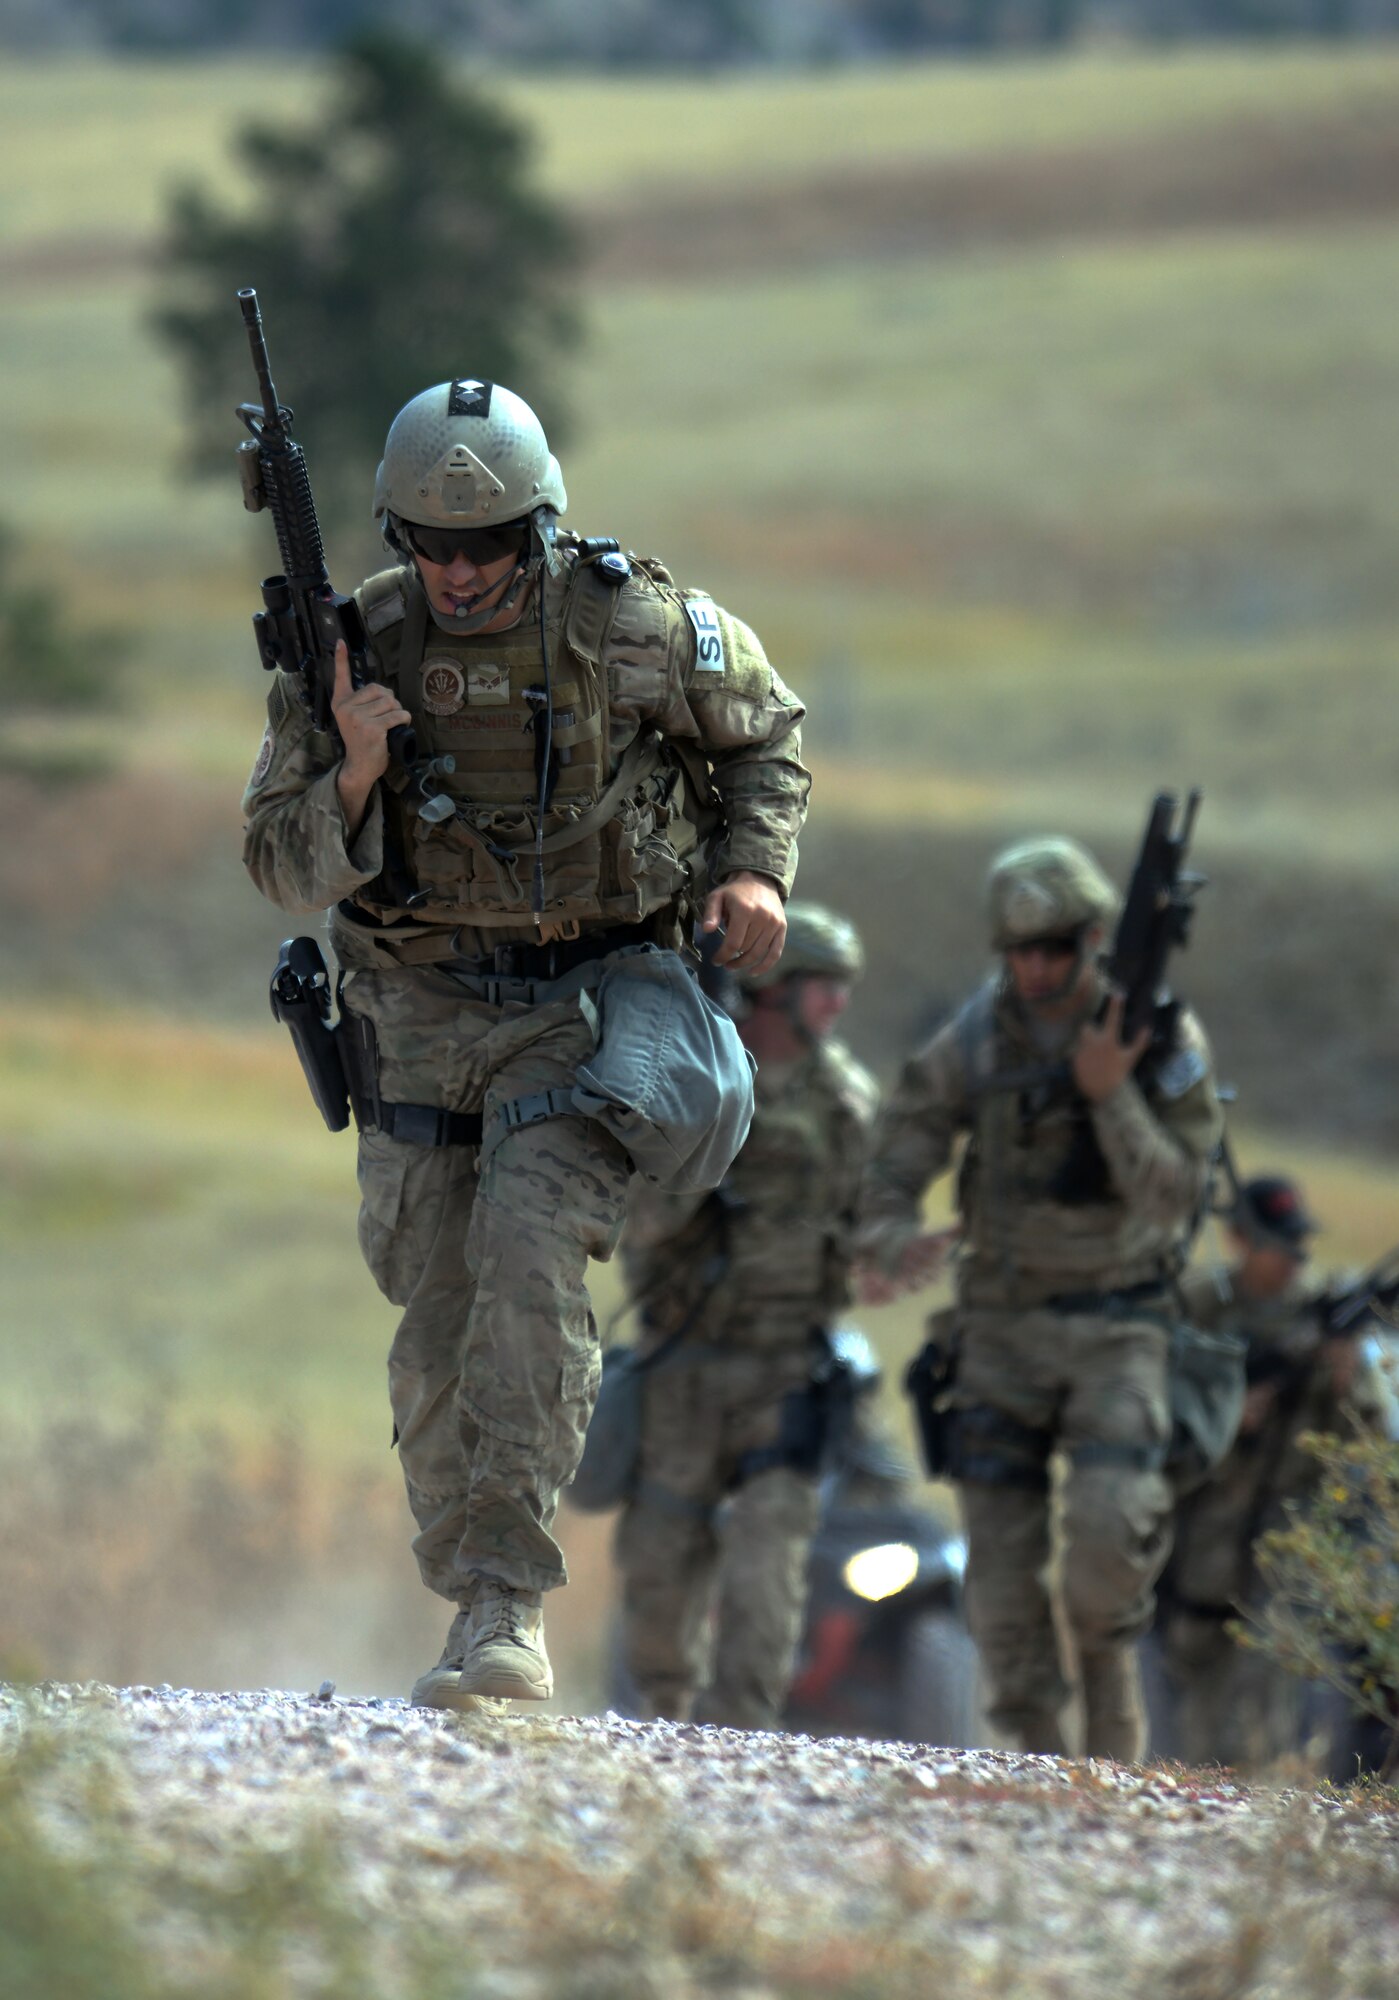 Senior Airman Christian McGinnis, 90th Missile Wing, F.E. Warren Air Force Base, Wyo., leads his team up a hill between two shooting ranges Sept. 23, 2015, during the shooting range portion of the 2015 Global Strike Challenge security forces competition on Camp Guernsey, Wyo. Each portion of the GSC is designed to test security forces Airmen on day-to-day skills as well as pushing them physically. (U.S. Air Force photo by Senior Airman Brandon Valle)